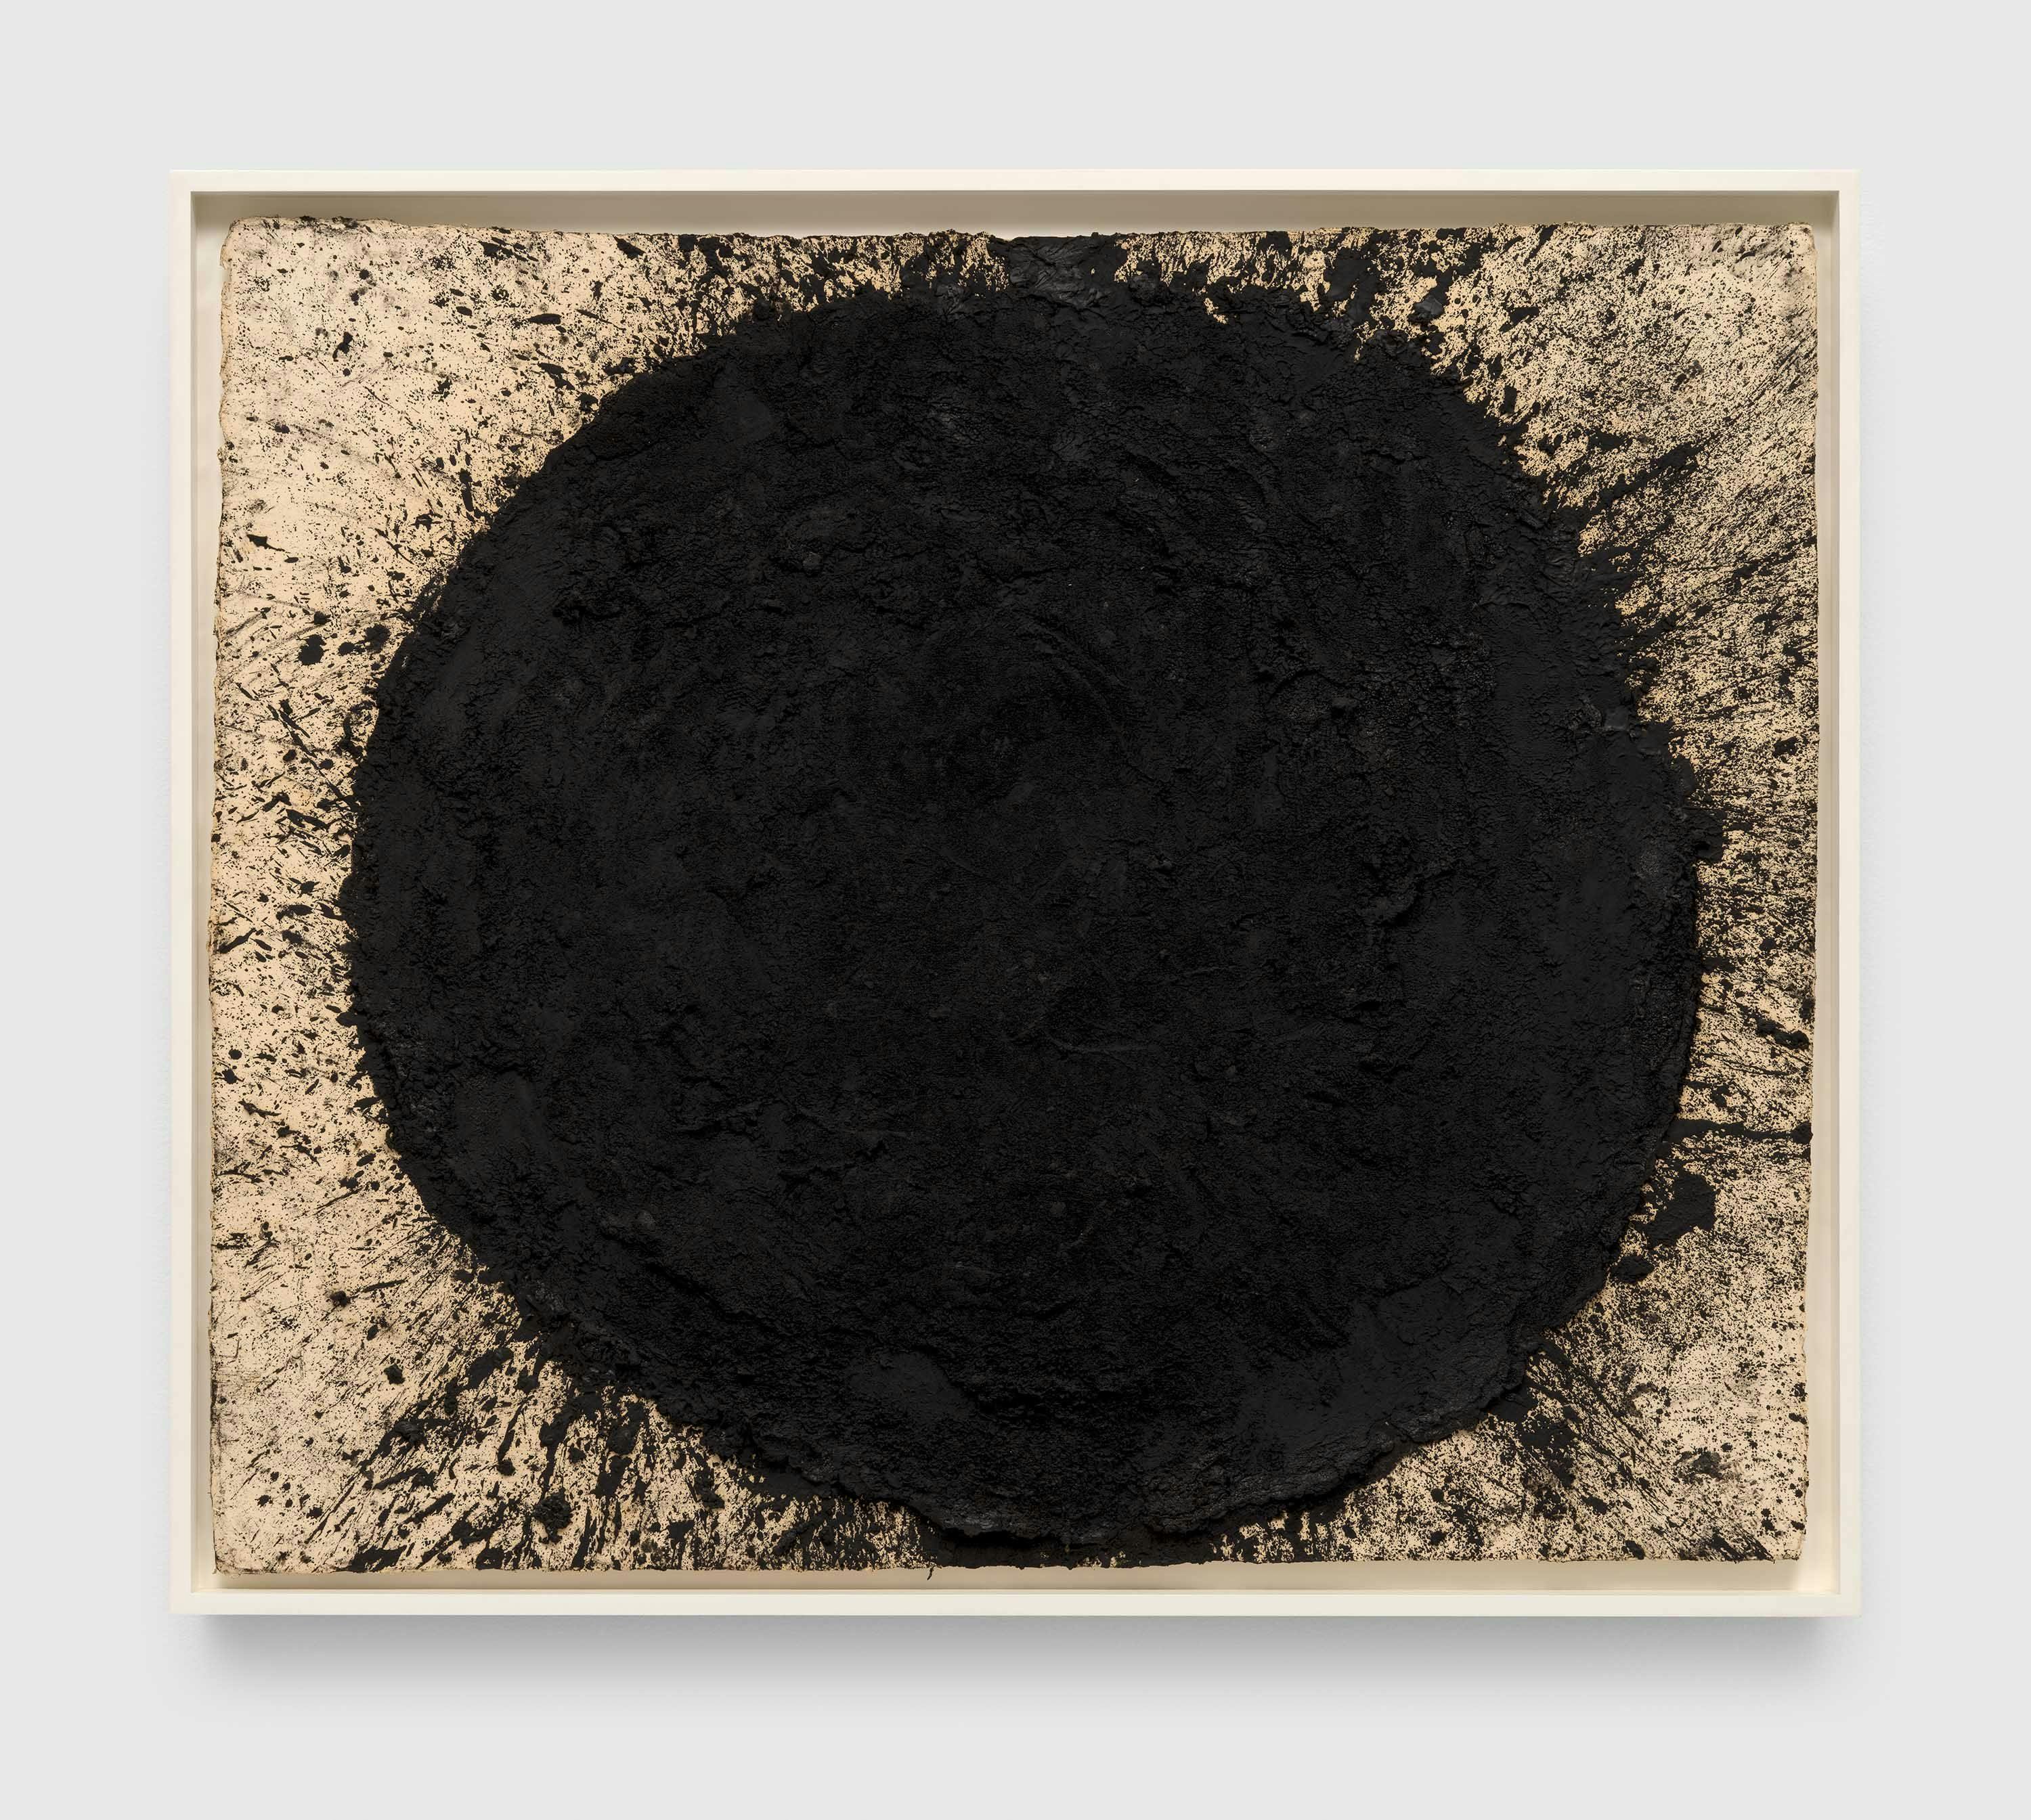 A drawing by Richard Serra, titled out-of-round XVII, dated 1999.